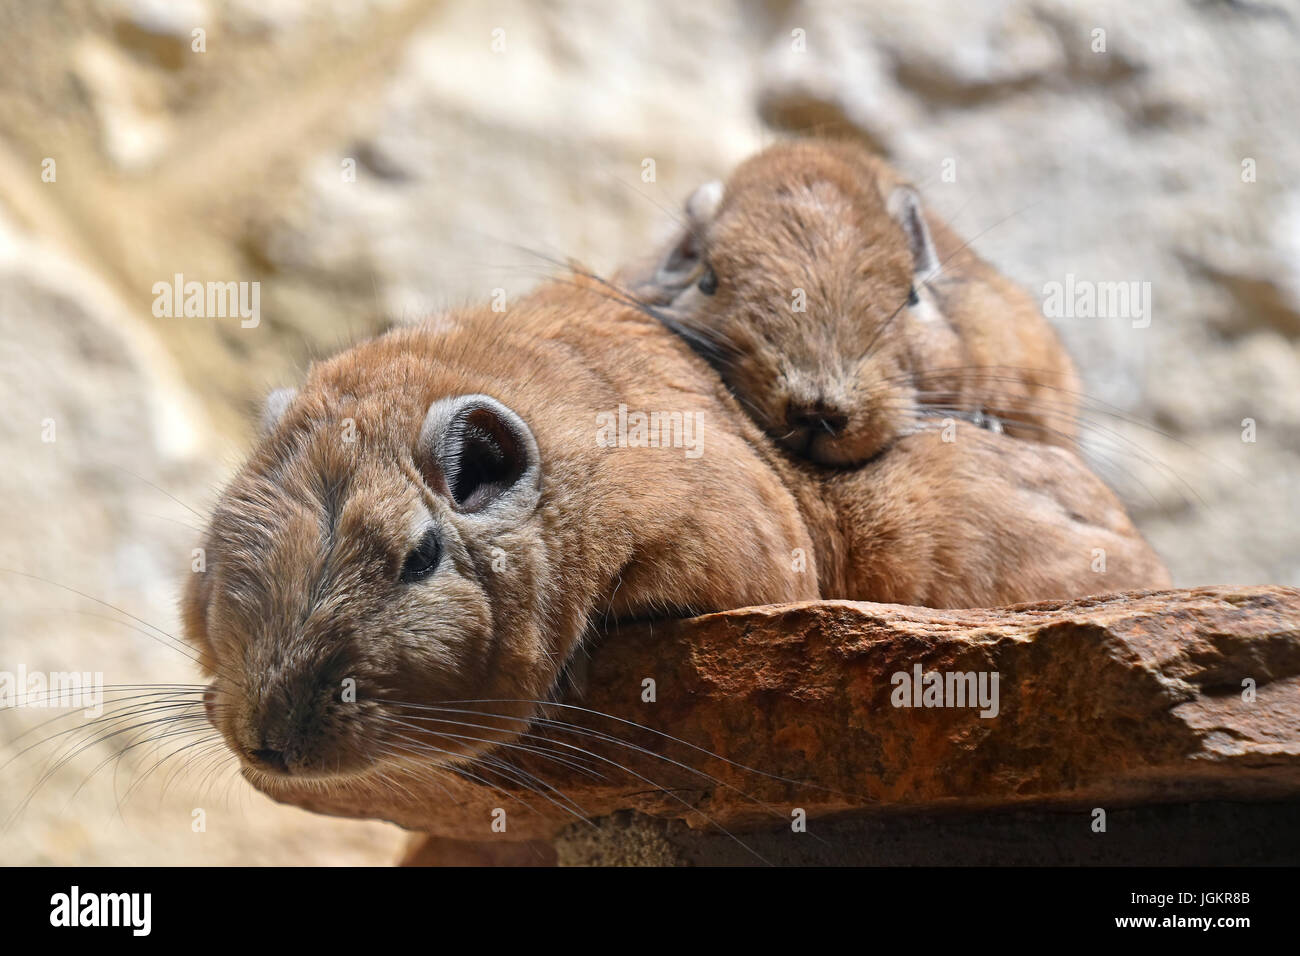 Close up portrait of family of two Gundi comb rats, African rodents, laying down together relaxed on stone and looking at camera, low angle view Stock Photo